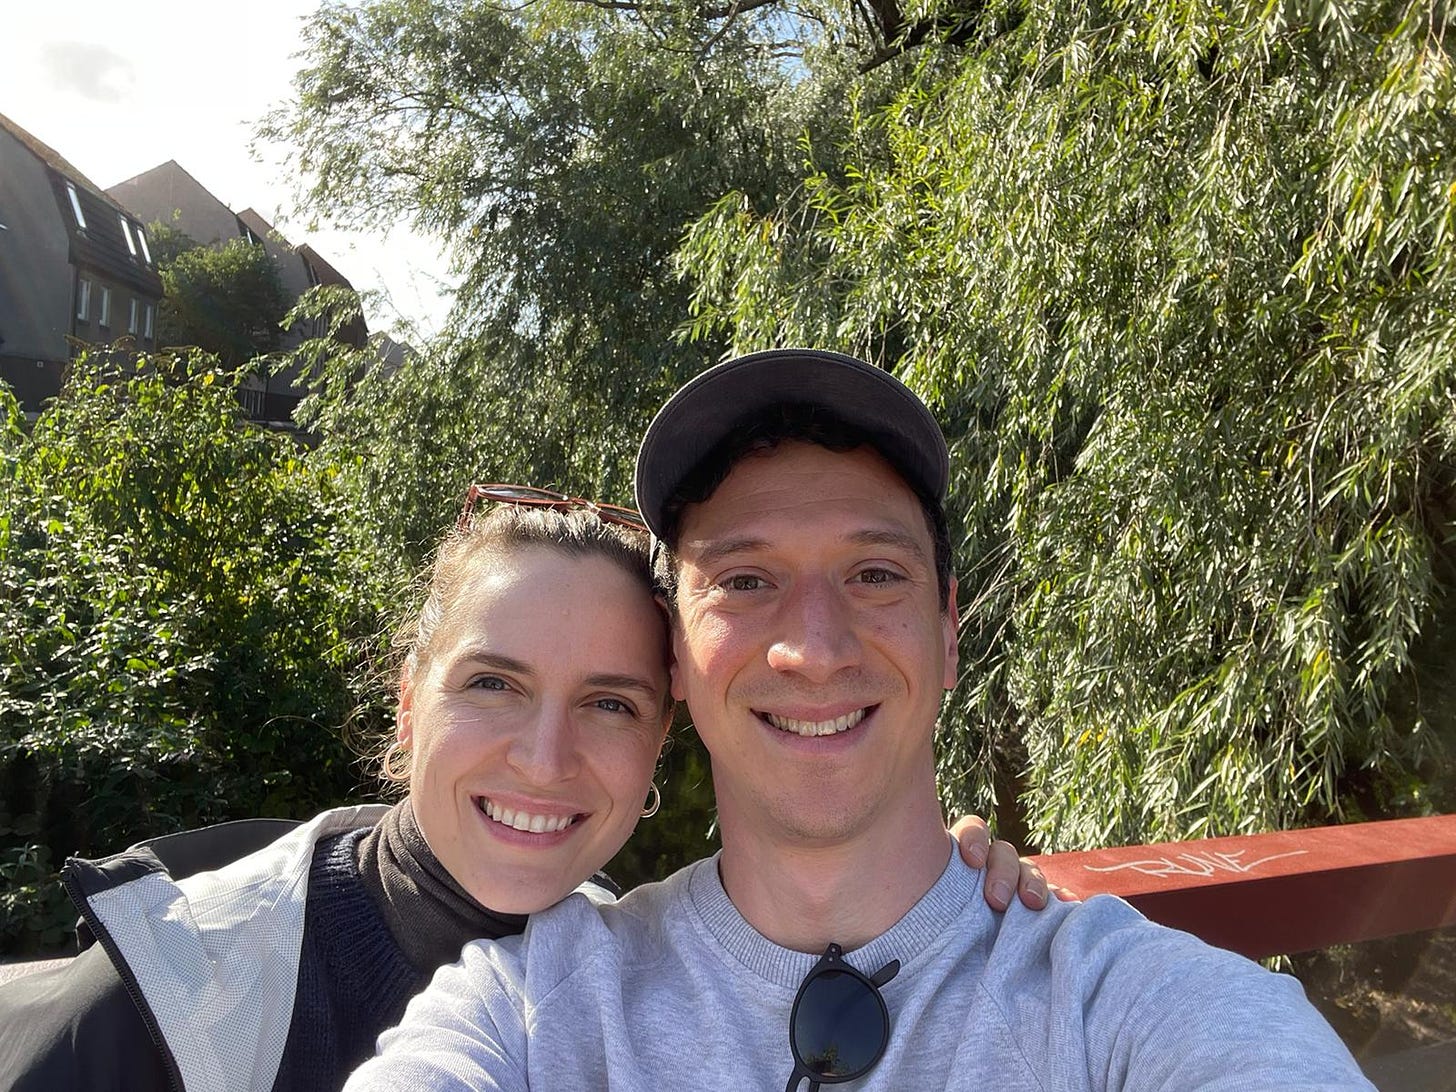 Two people standing on a bridge with greenery in the background on a sunny day